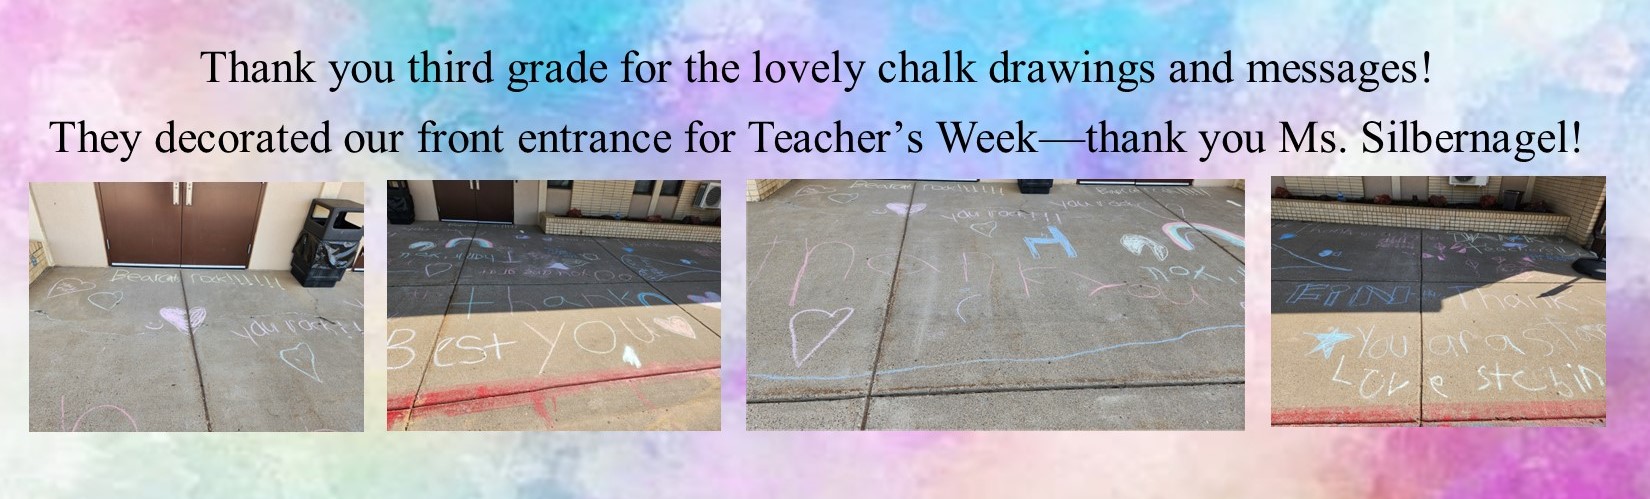 Images of chalk drawings from students for Teacher Appreciation Week